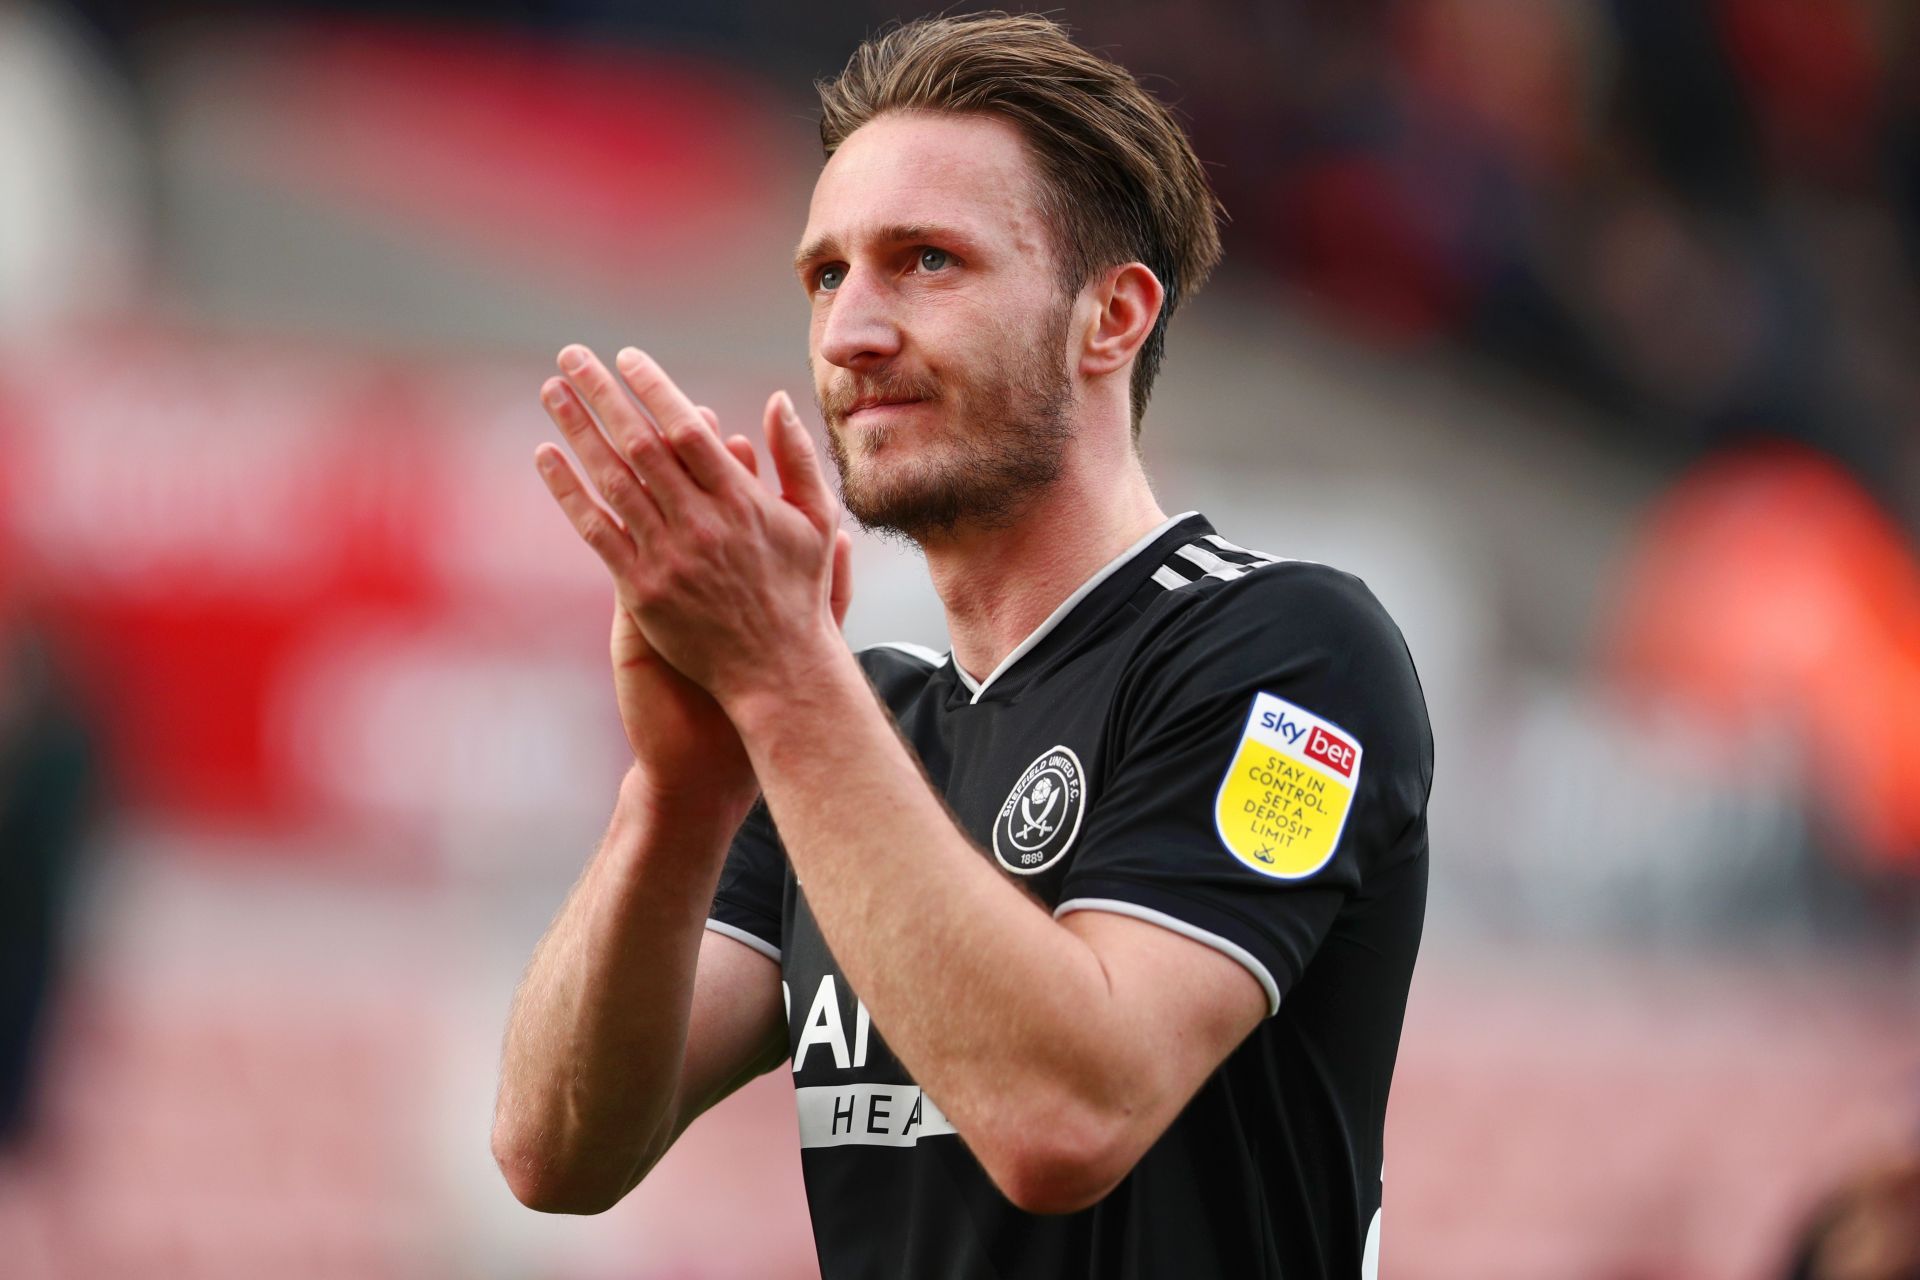 Sheffield United will host Queens Park Rangers on Tuesday - Sky Bet Championship